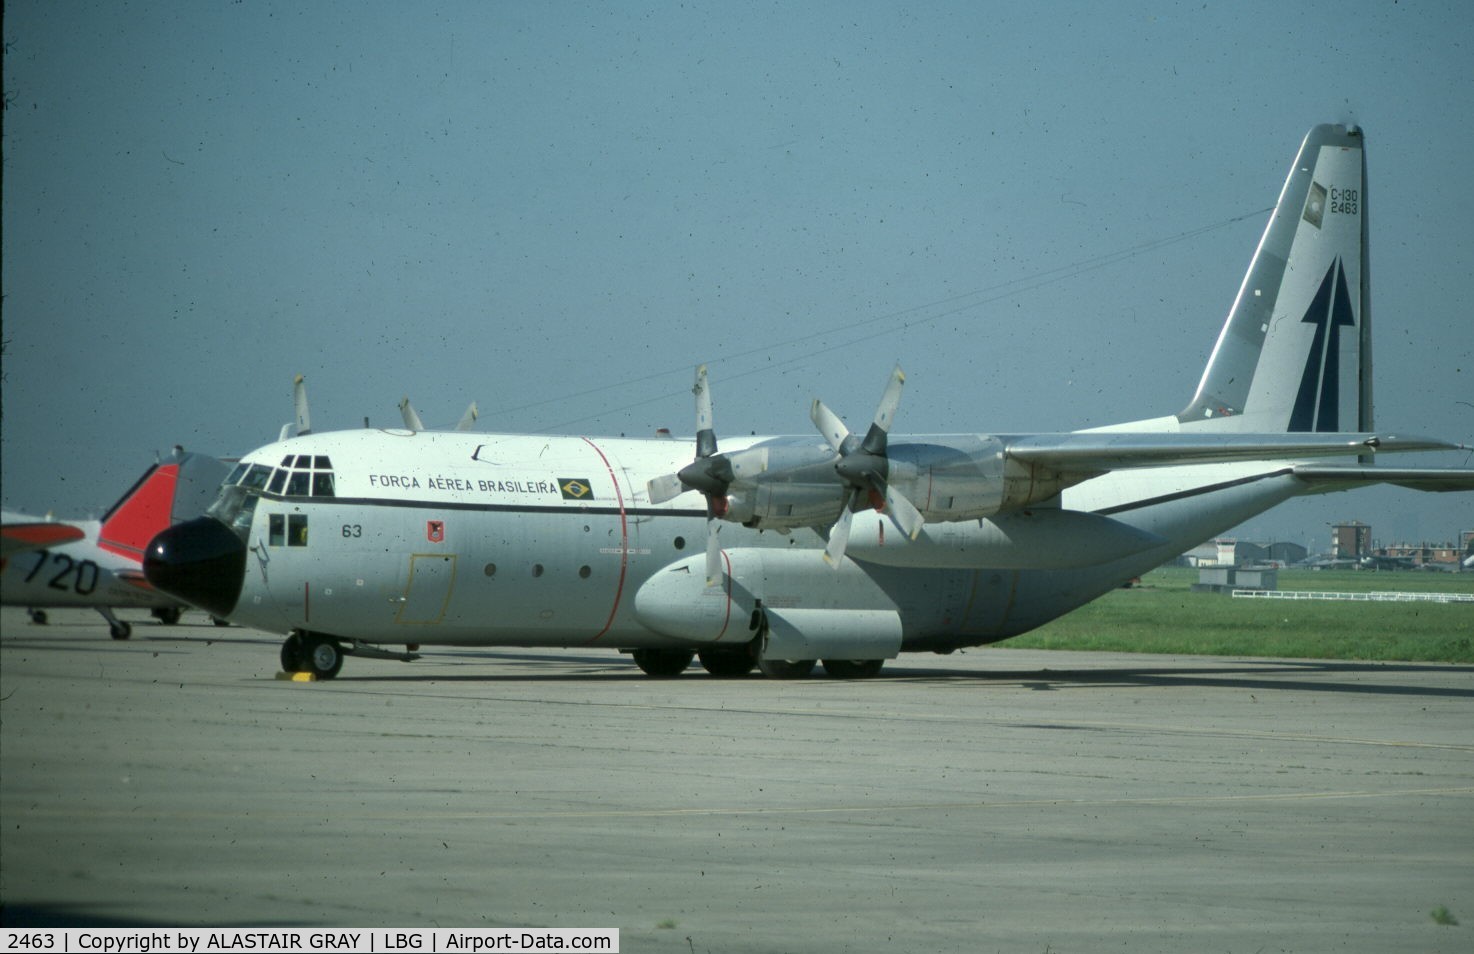 2463, 1975 Lockheed C-130H Hercules C/N 382-4570, caught on a sunny day at le Bourget 1979